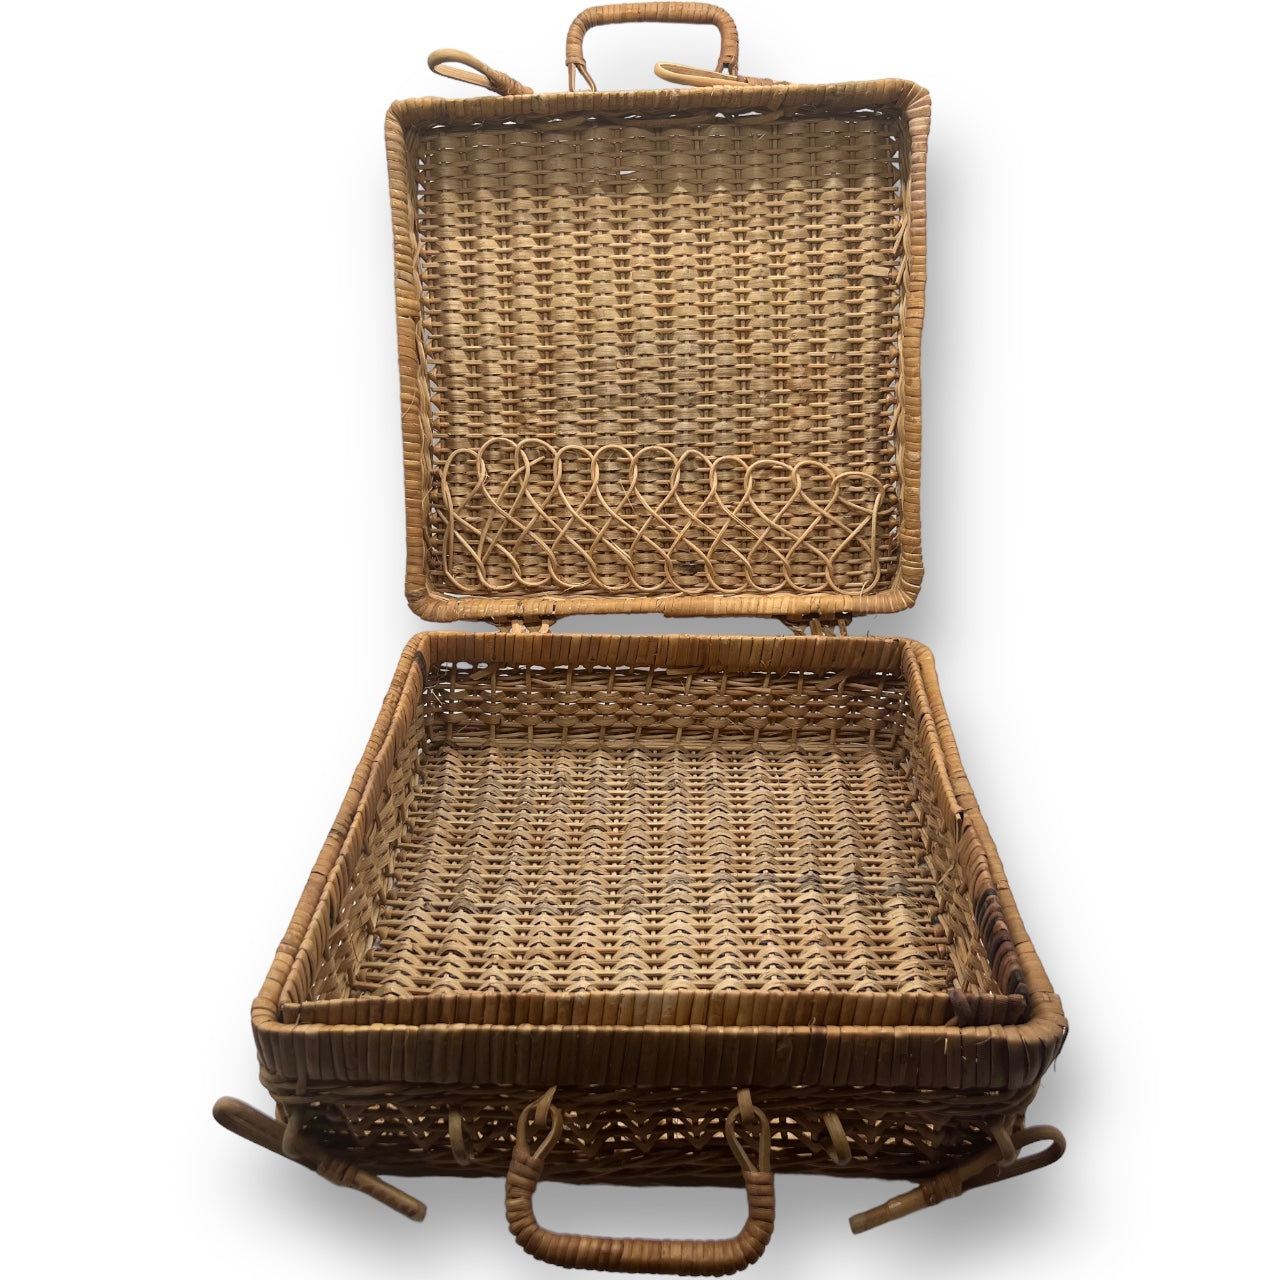 Vintage Handmade Woven Picnic Wicker Basket Briefcase Made in Hong Kong - Set of 2